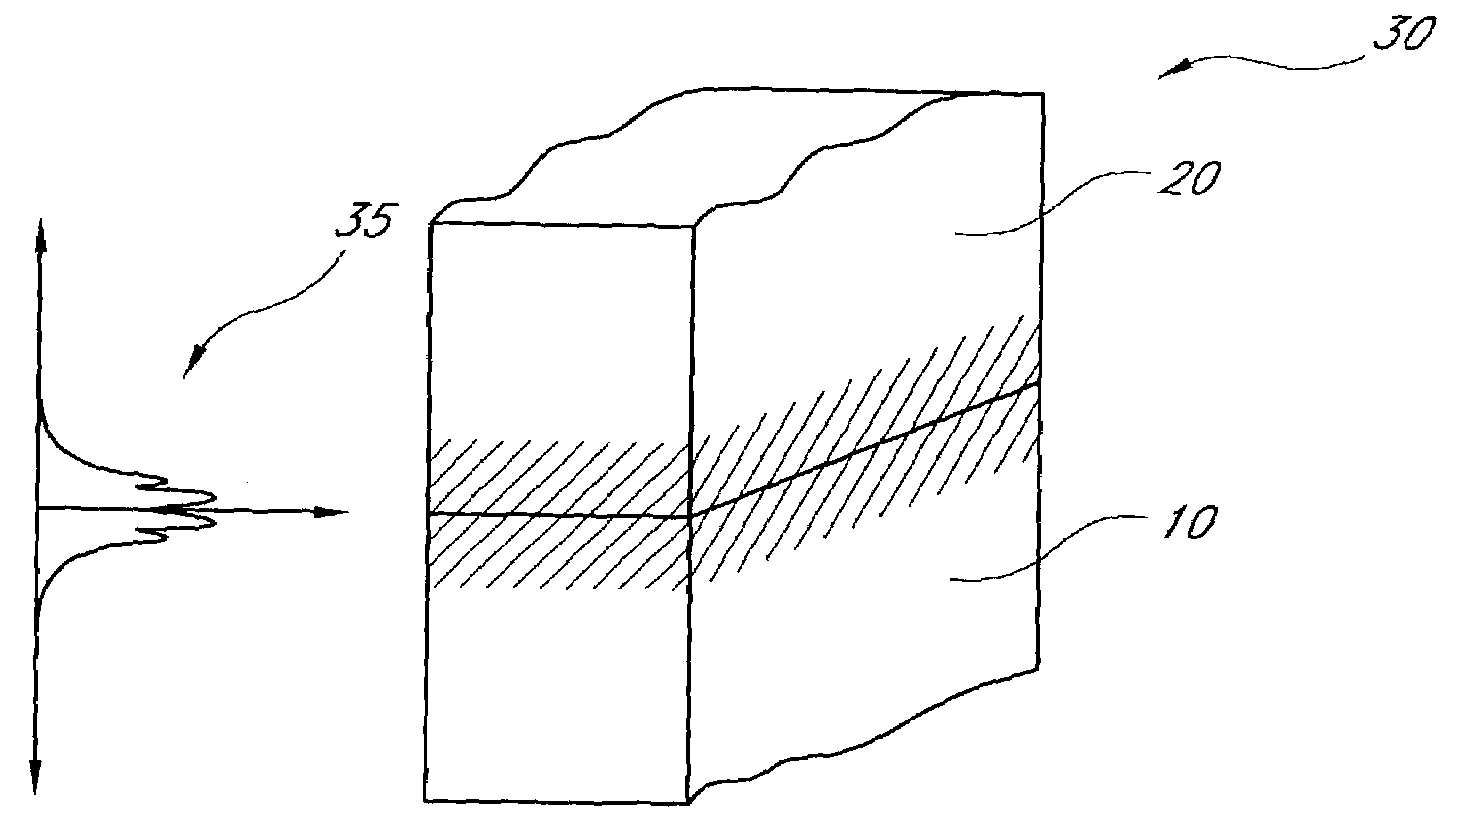 Method of measuring a physical function using a symmetric composite function